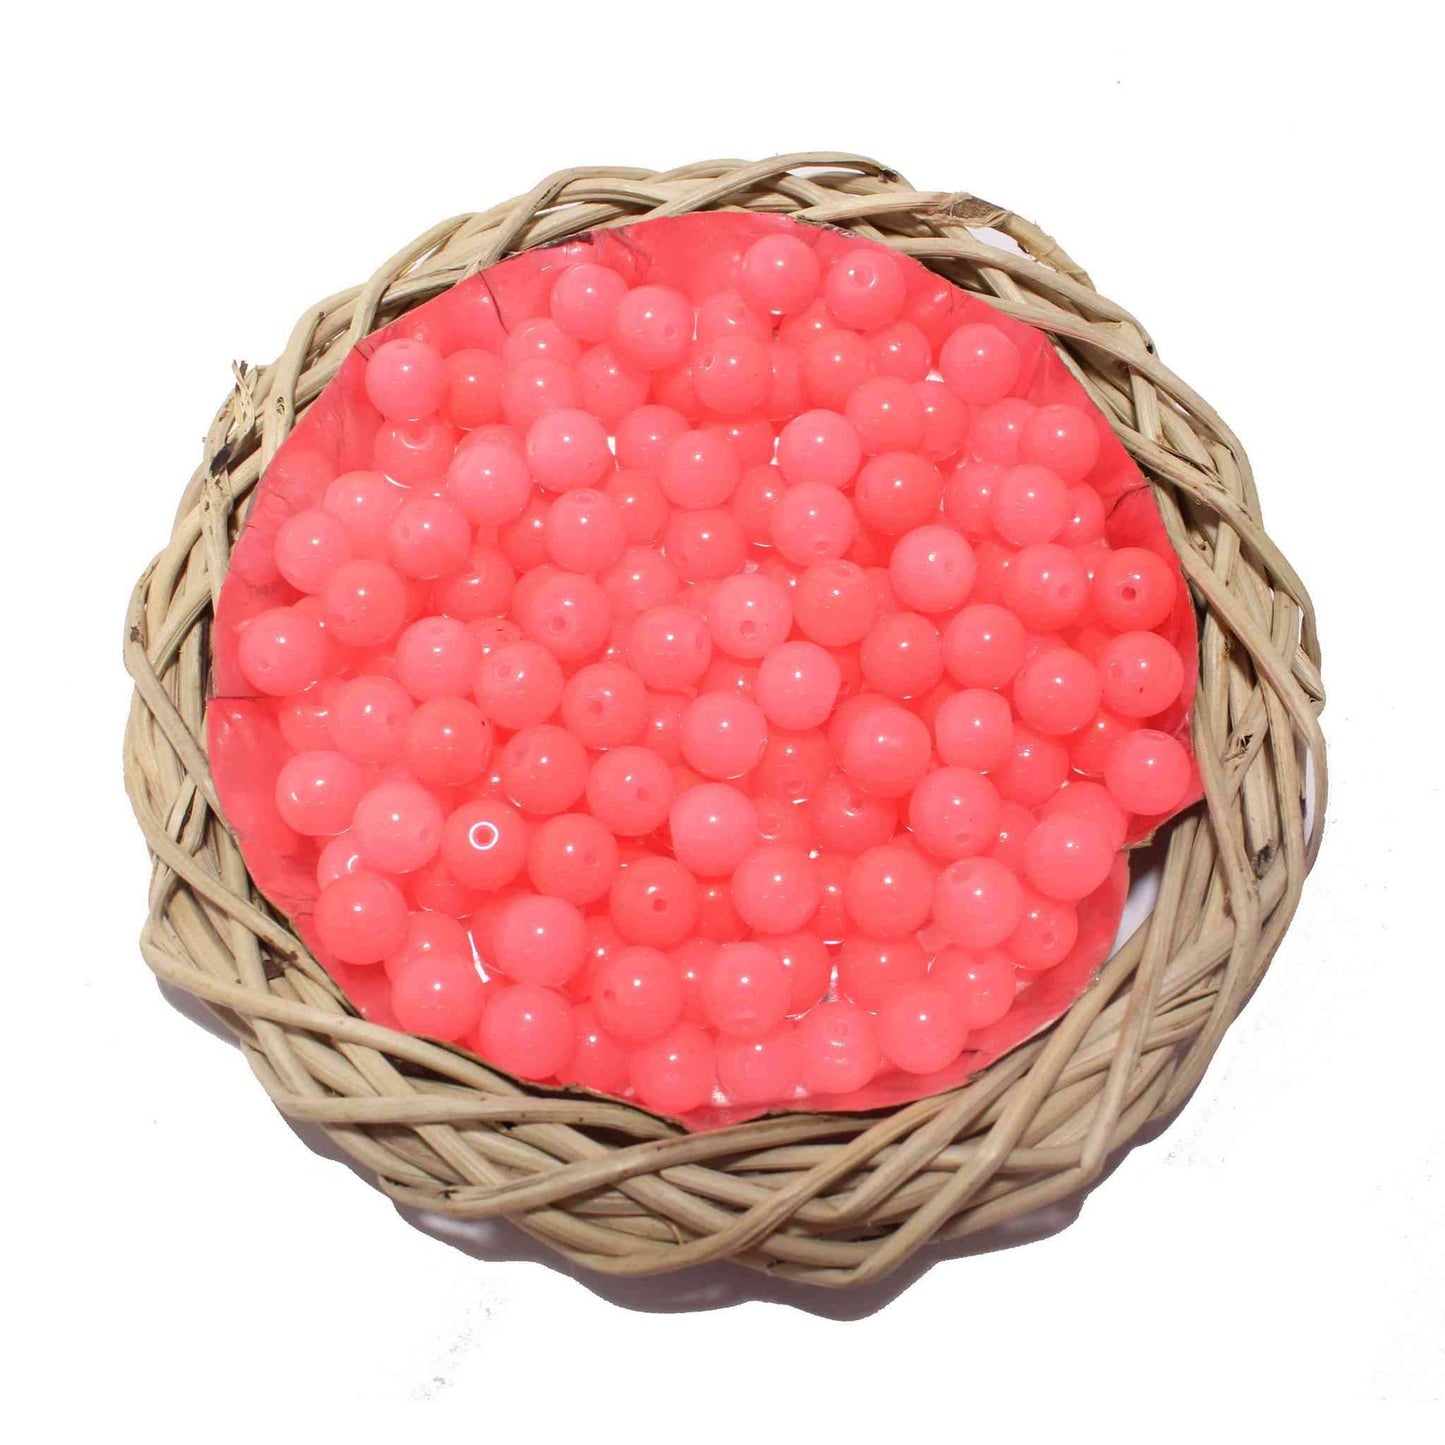 Premium quality Round shape Glass Beads for DIY Craft, Trousseau Packing or Decoration - Design 725, 10mm, Light Pink - Indian Petals